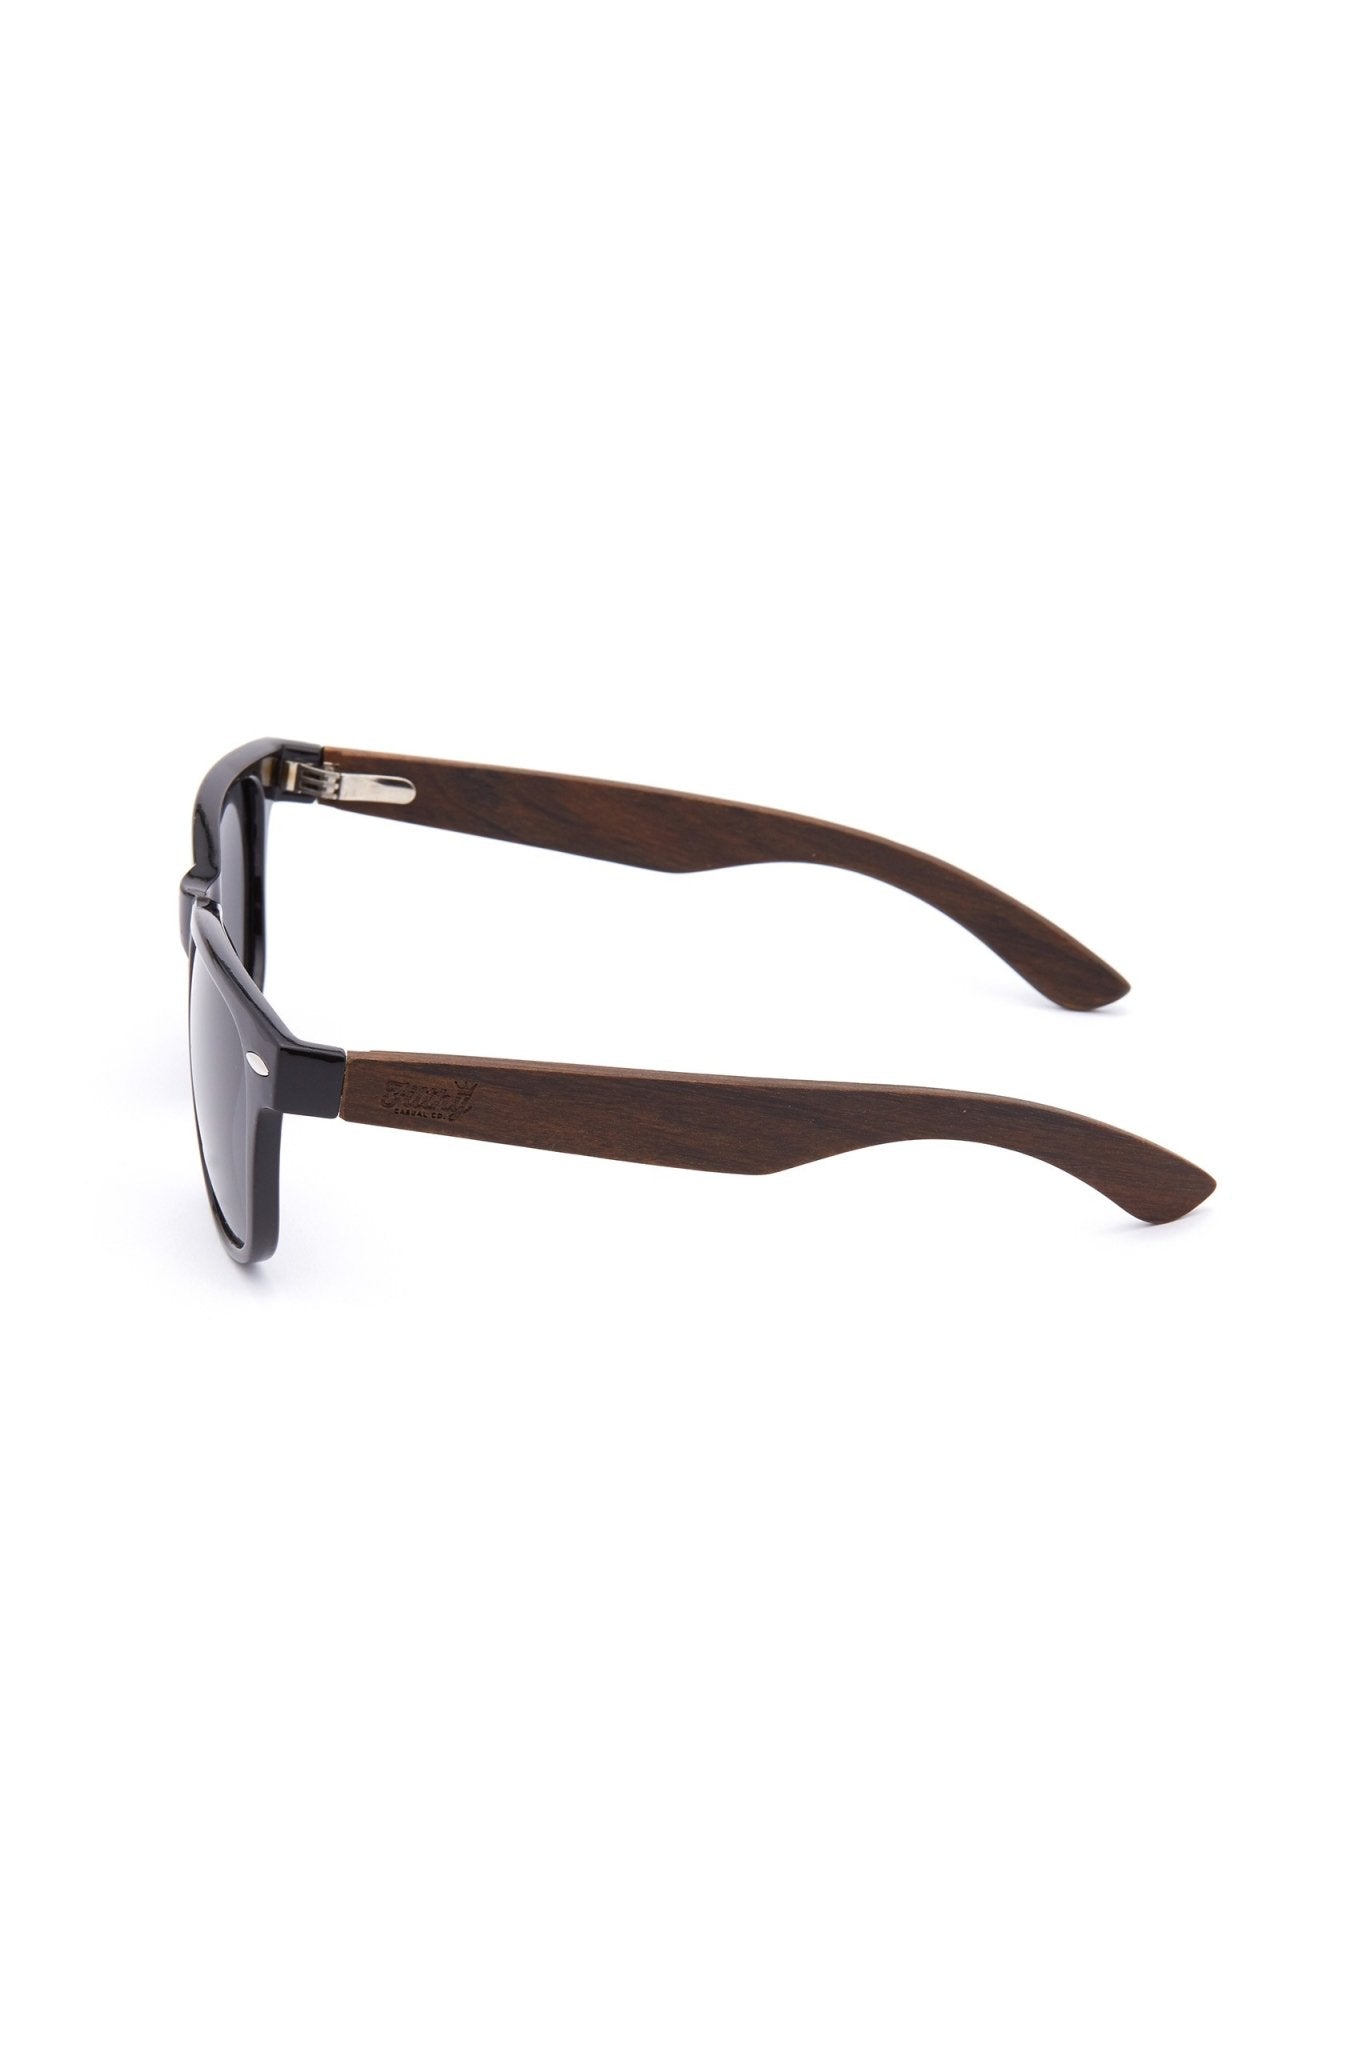 S1 Stealth Shades - Filthy Casual Co.